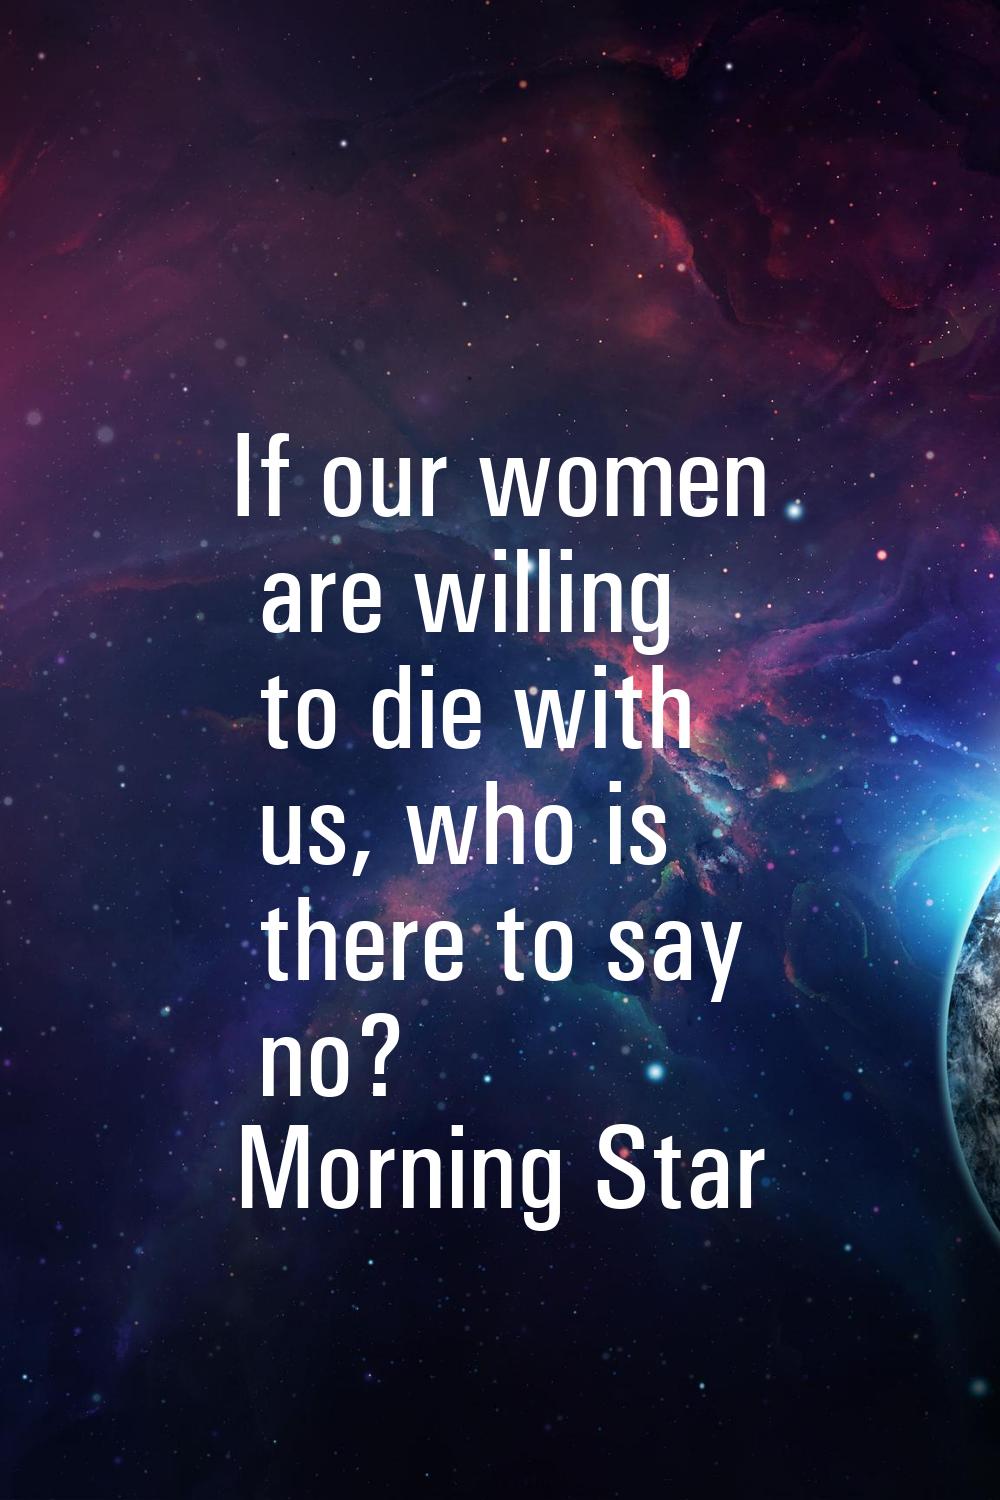 If our women are willing to die with us, who is there to say no?